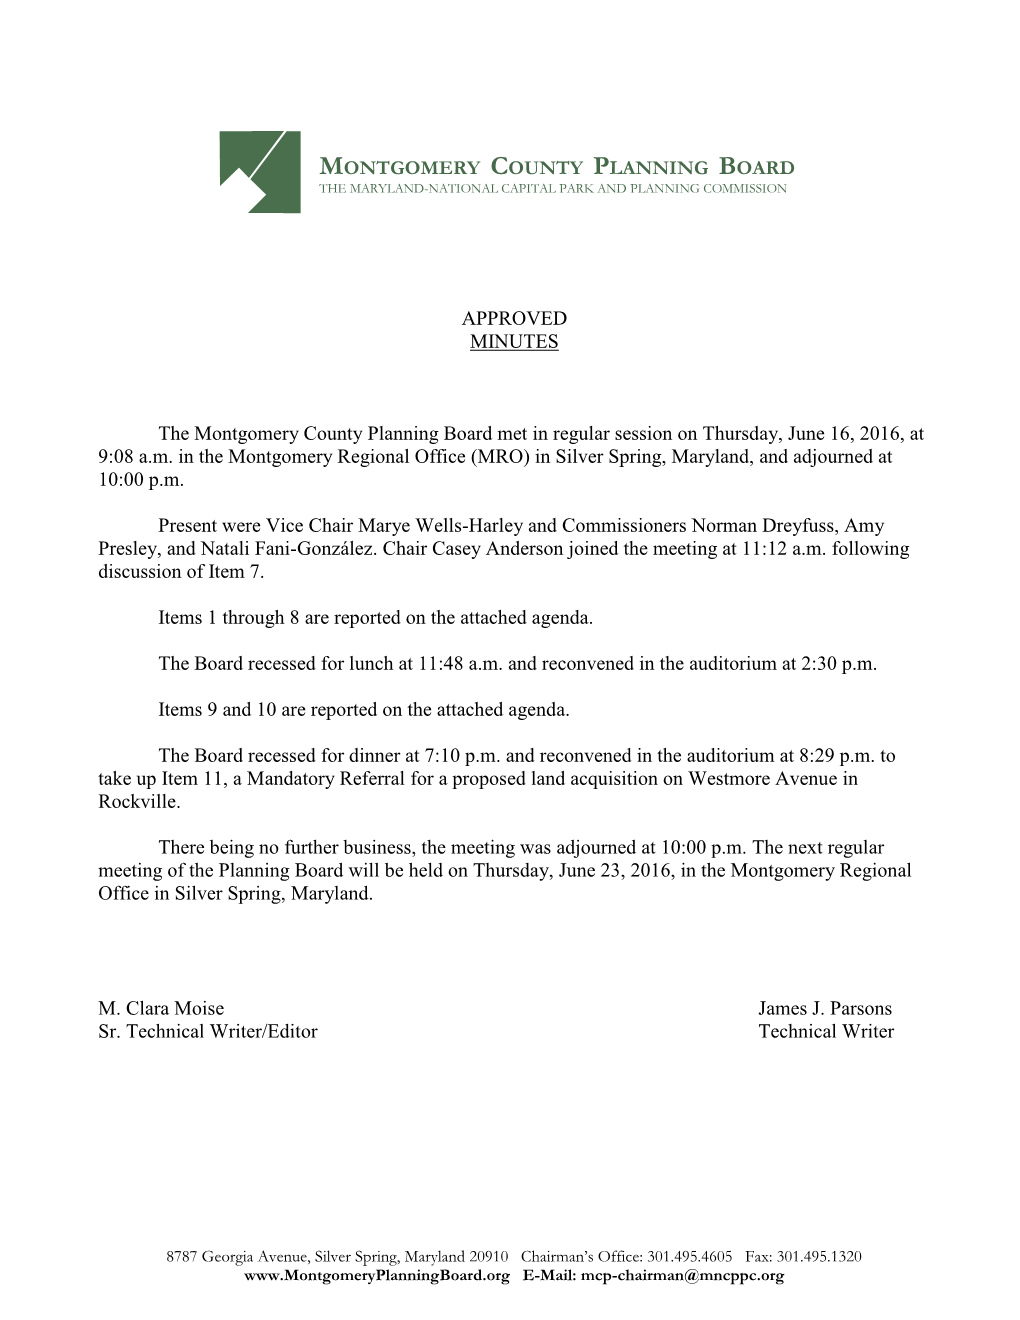 APPROVED MINUTES the Montgomery County Planning